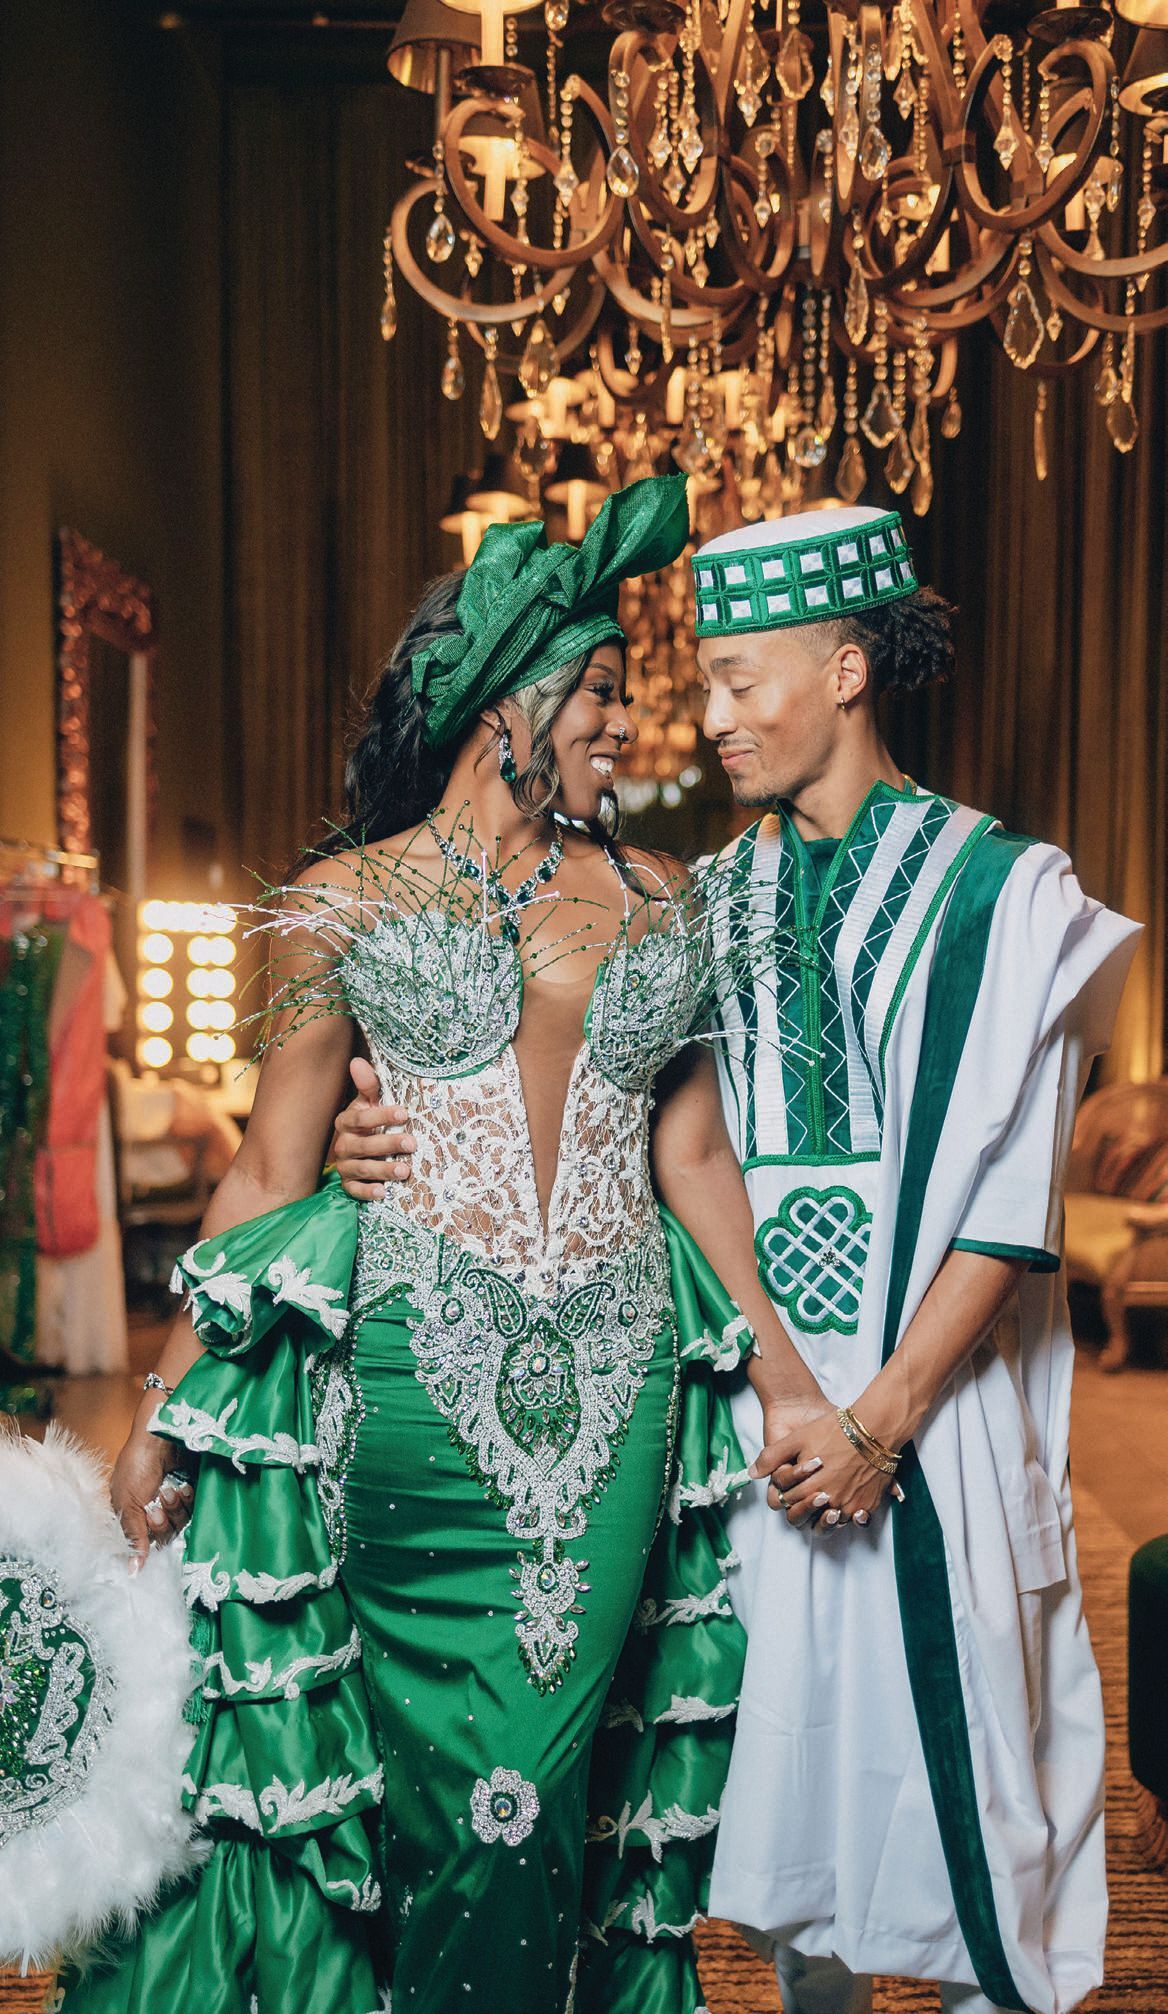 The couple donned traditional Nigerian wedding attire for part of the celebration. Photographed by REEM Photography